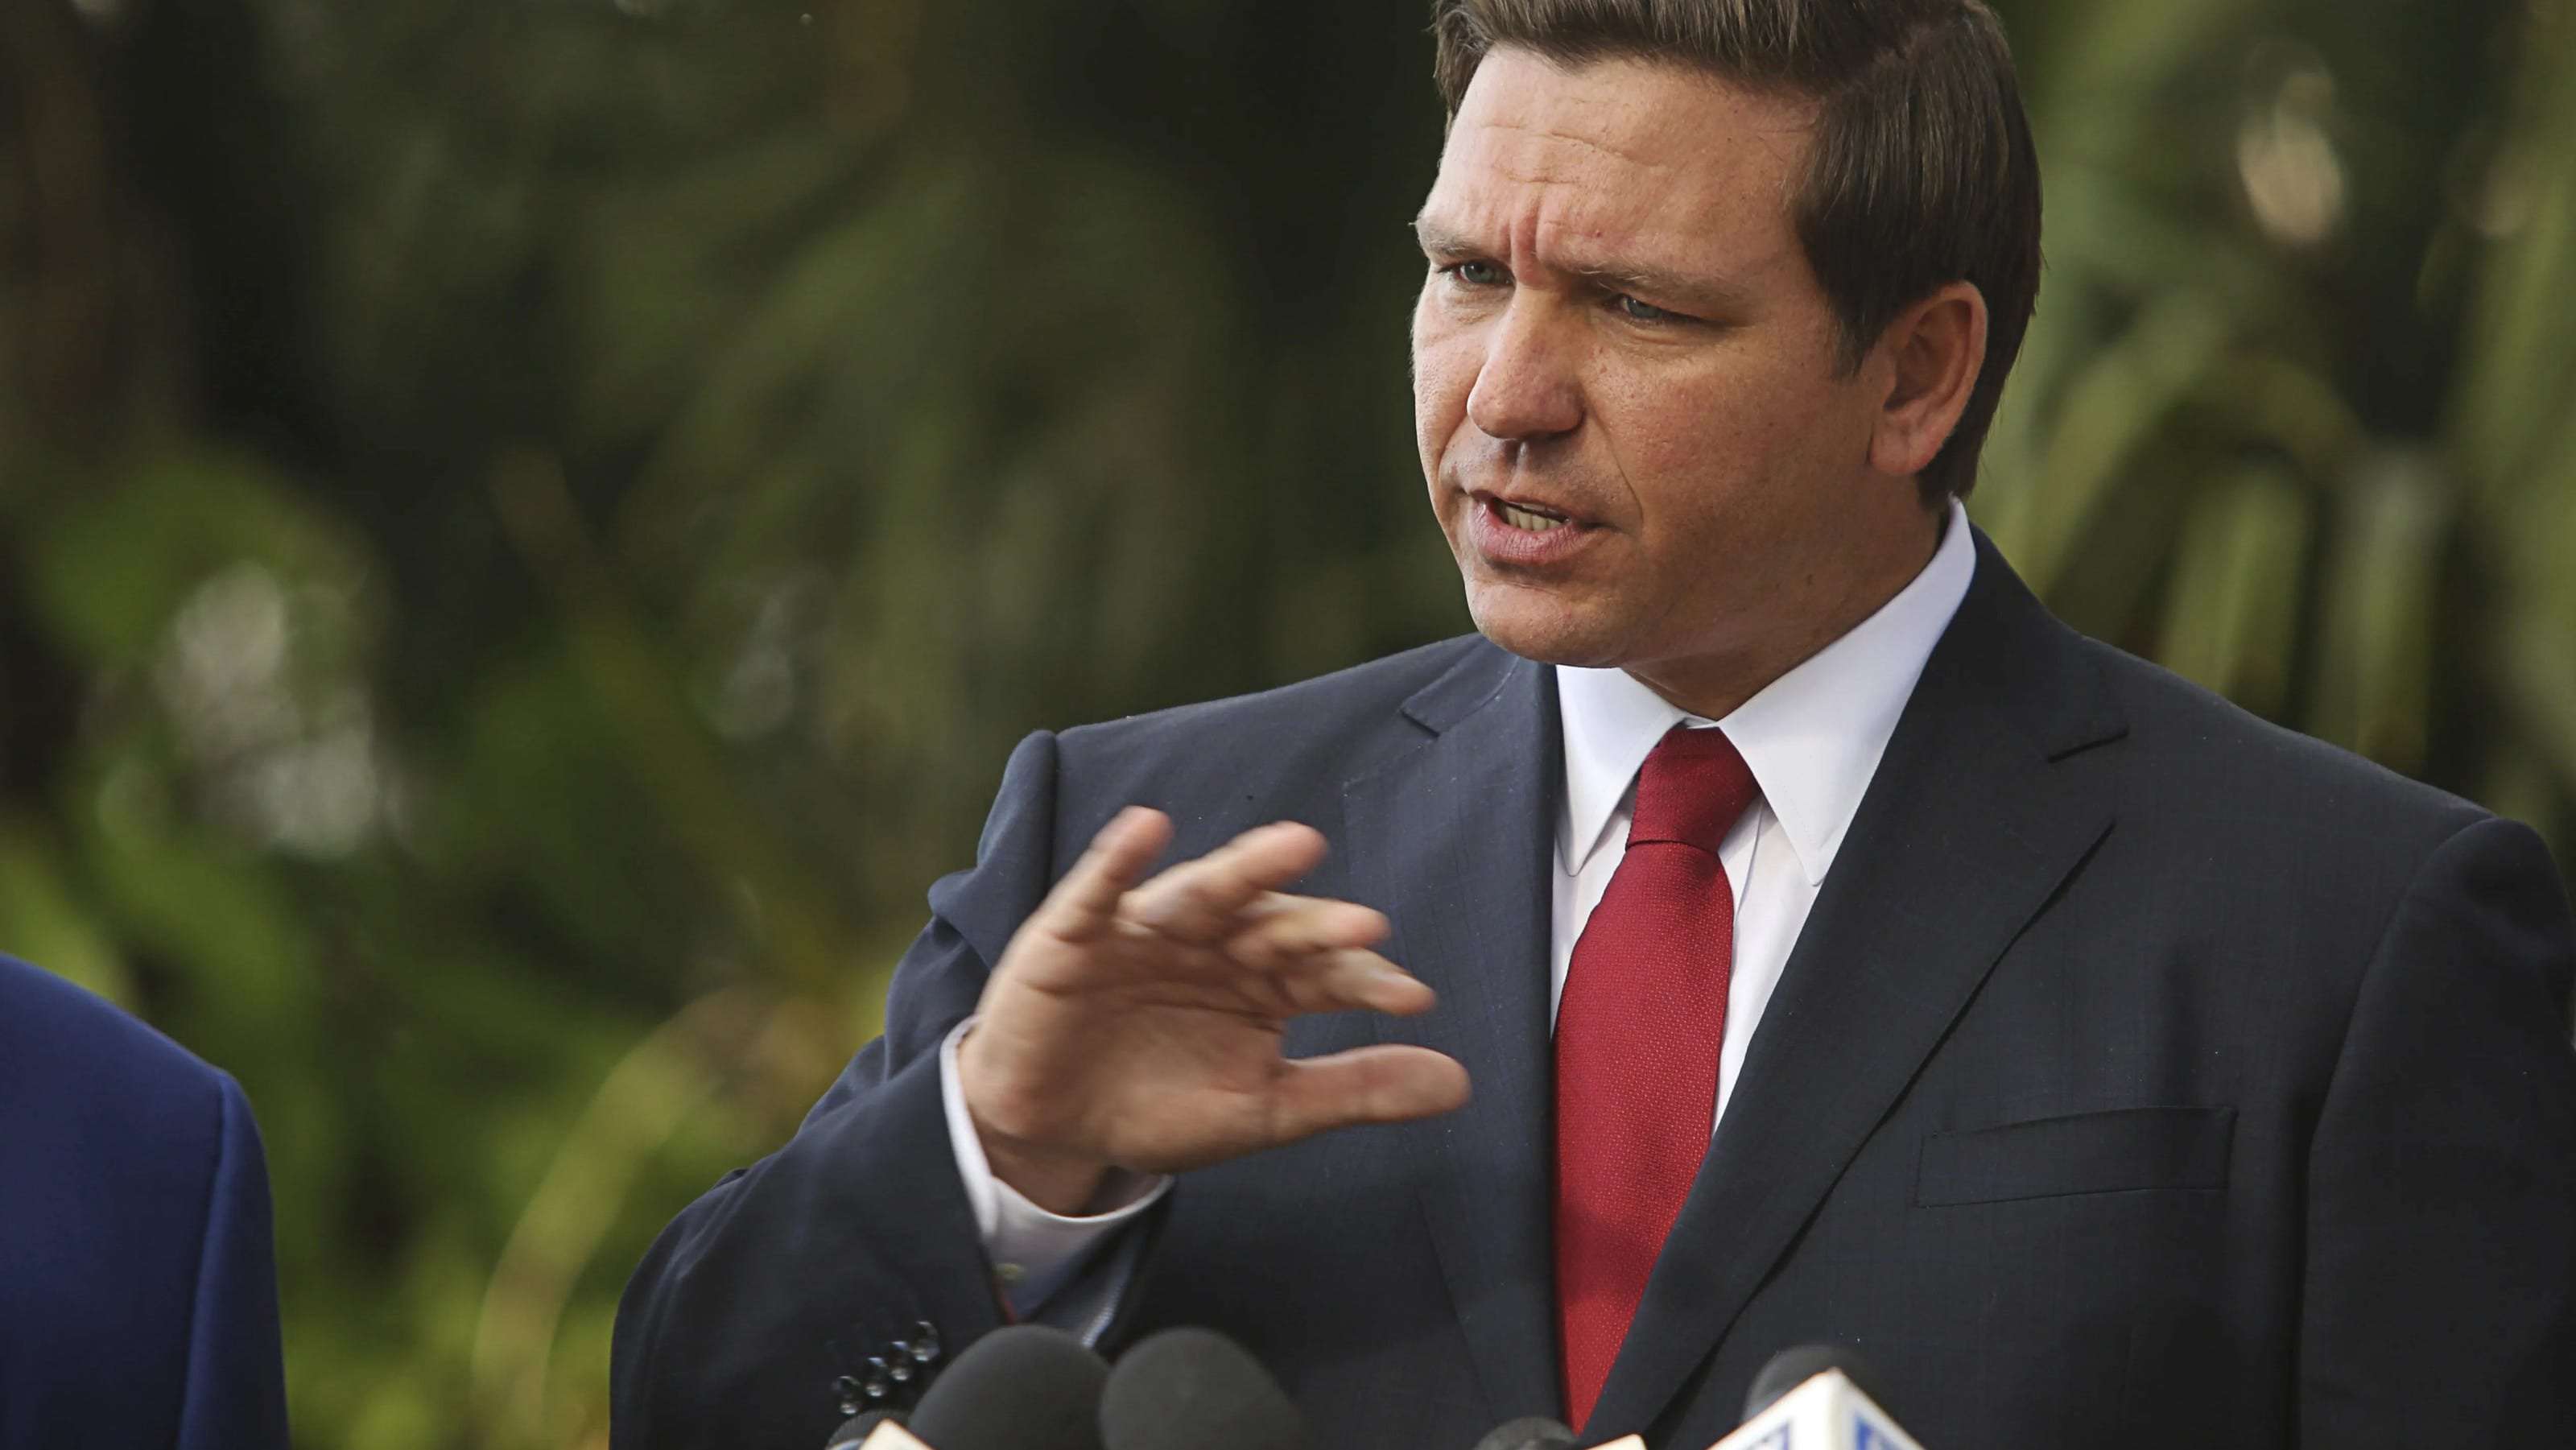 image for DeSantis calls medical marijuana 'very controversial' after fighting for it in Florida